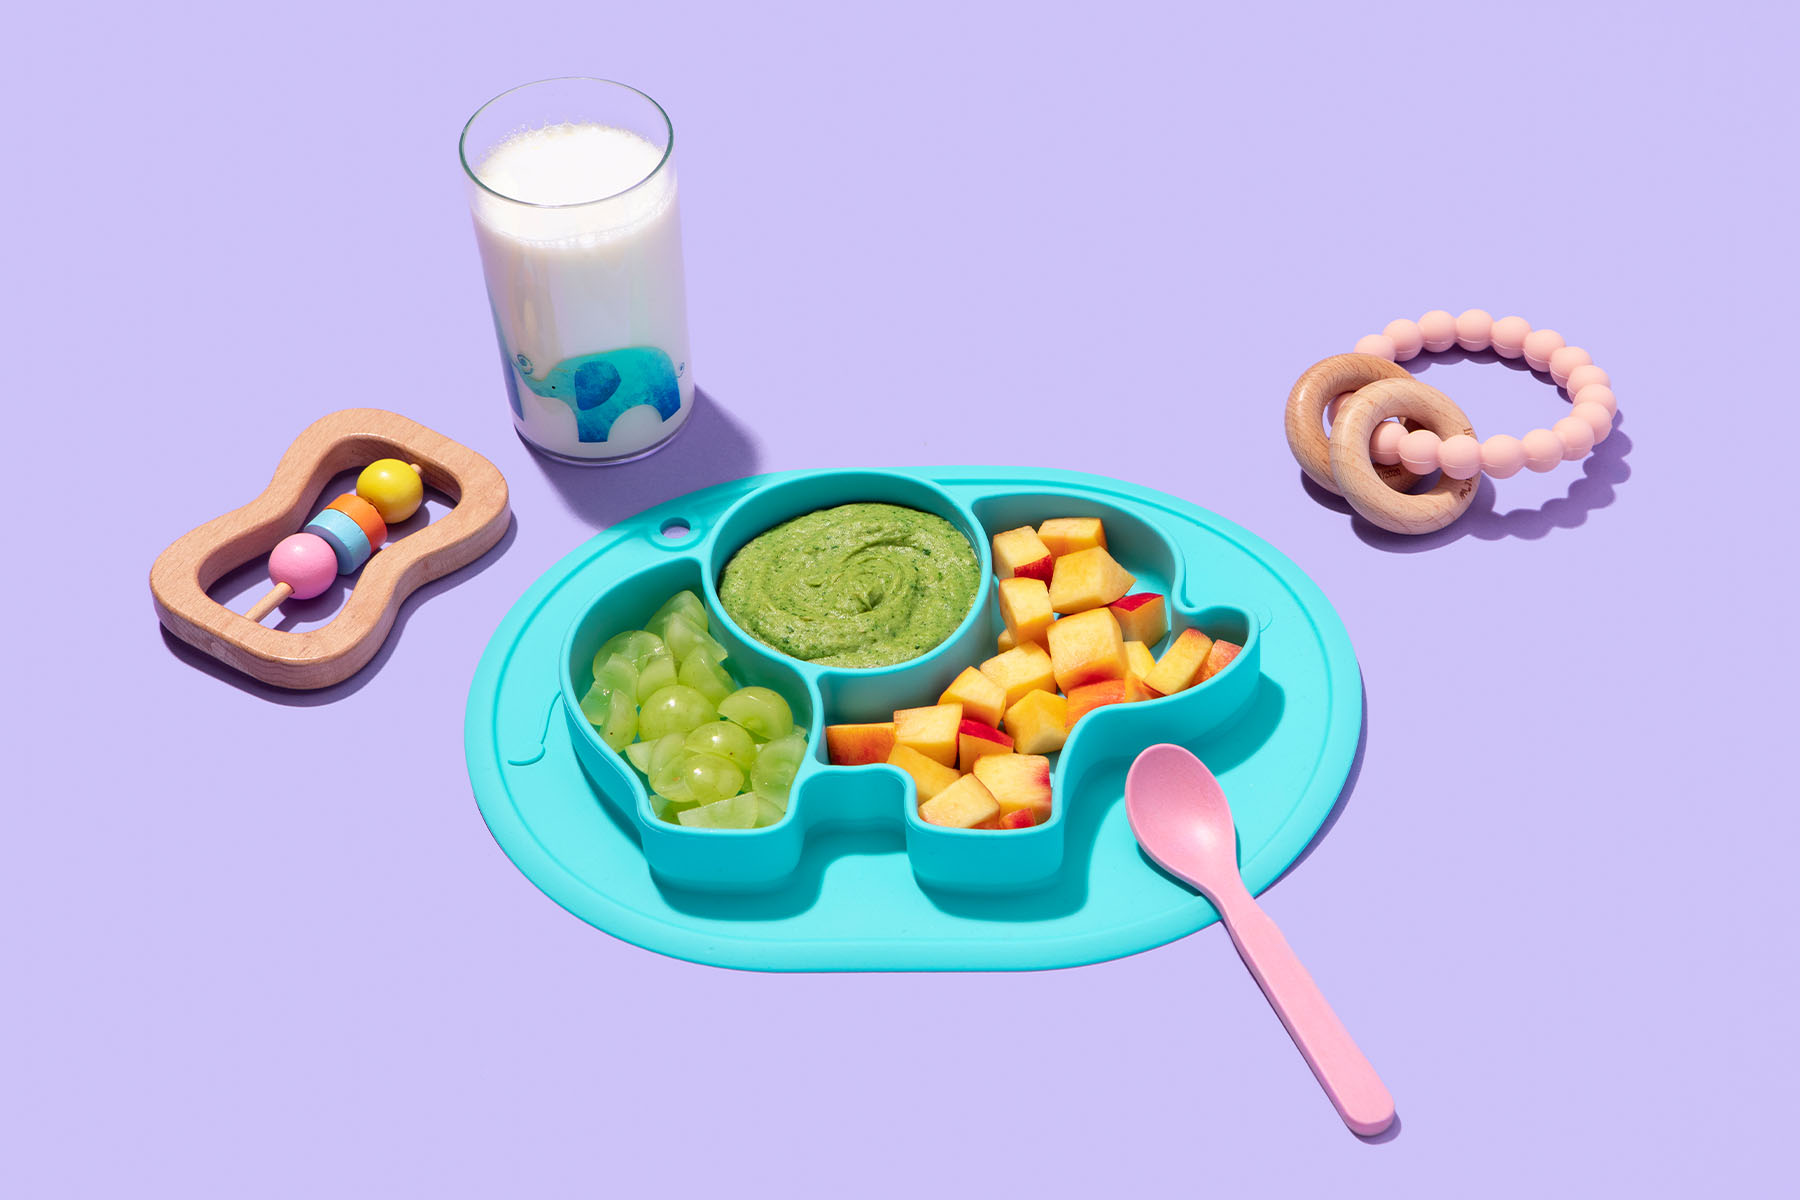 Plate of toddler food with pureed blend and fruits with glass of milk